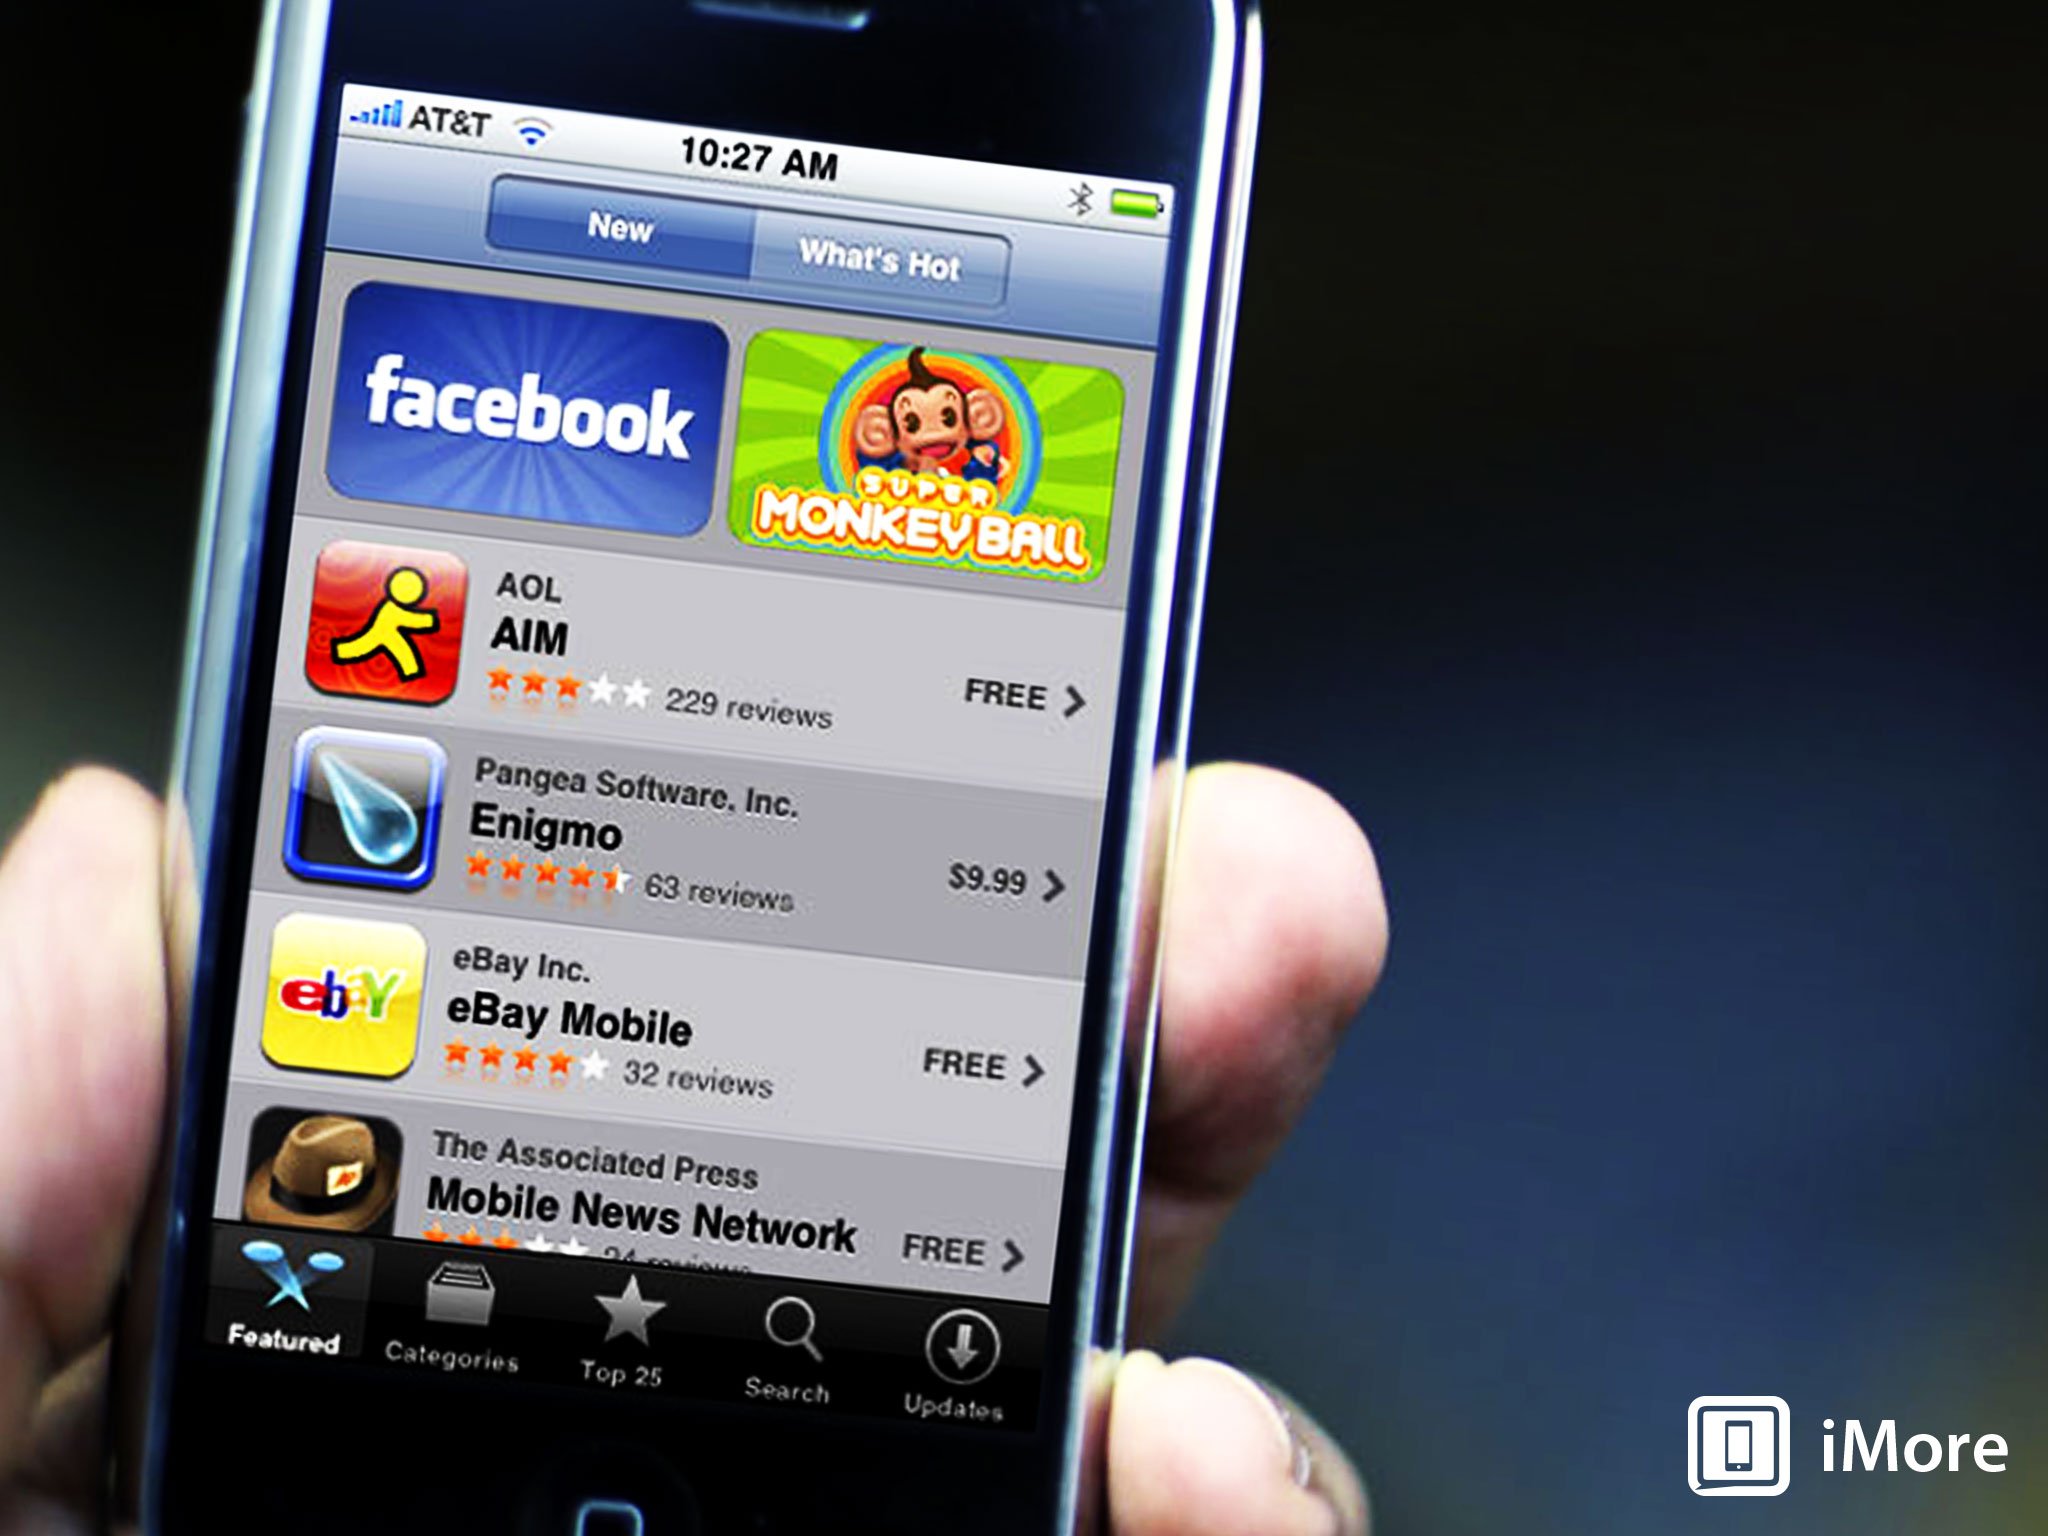 App Store Year One: Shocking successes, game-changers, and unpredictable pain